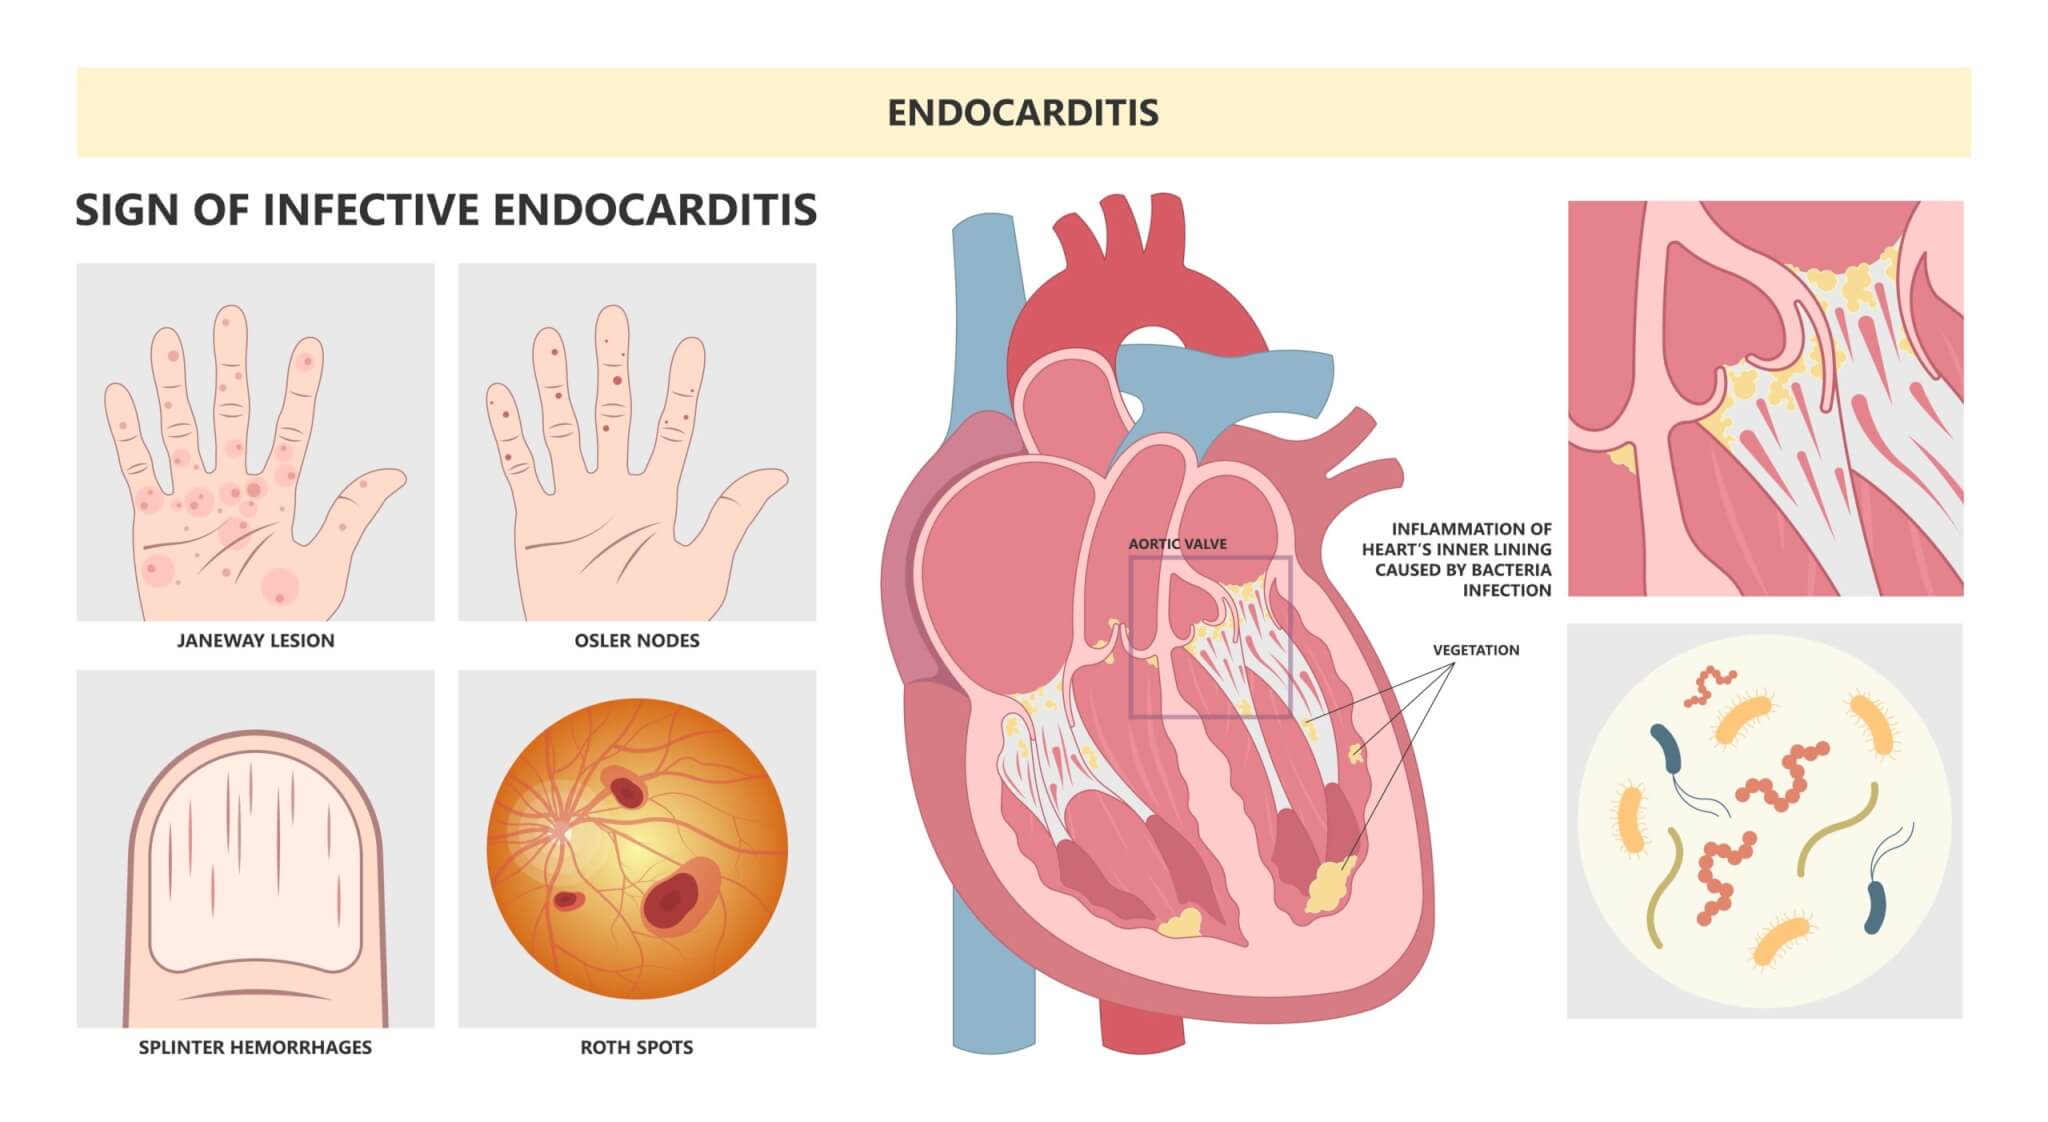 Signs of infective endocarditis